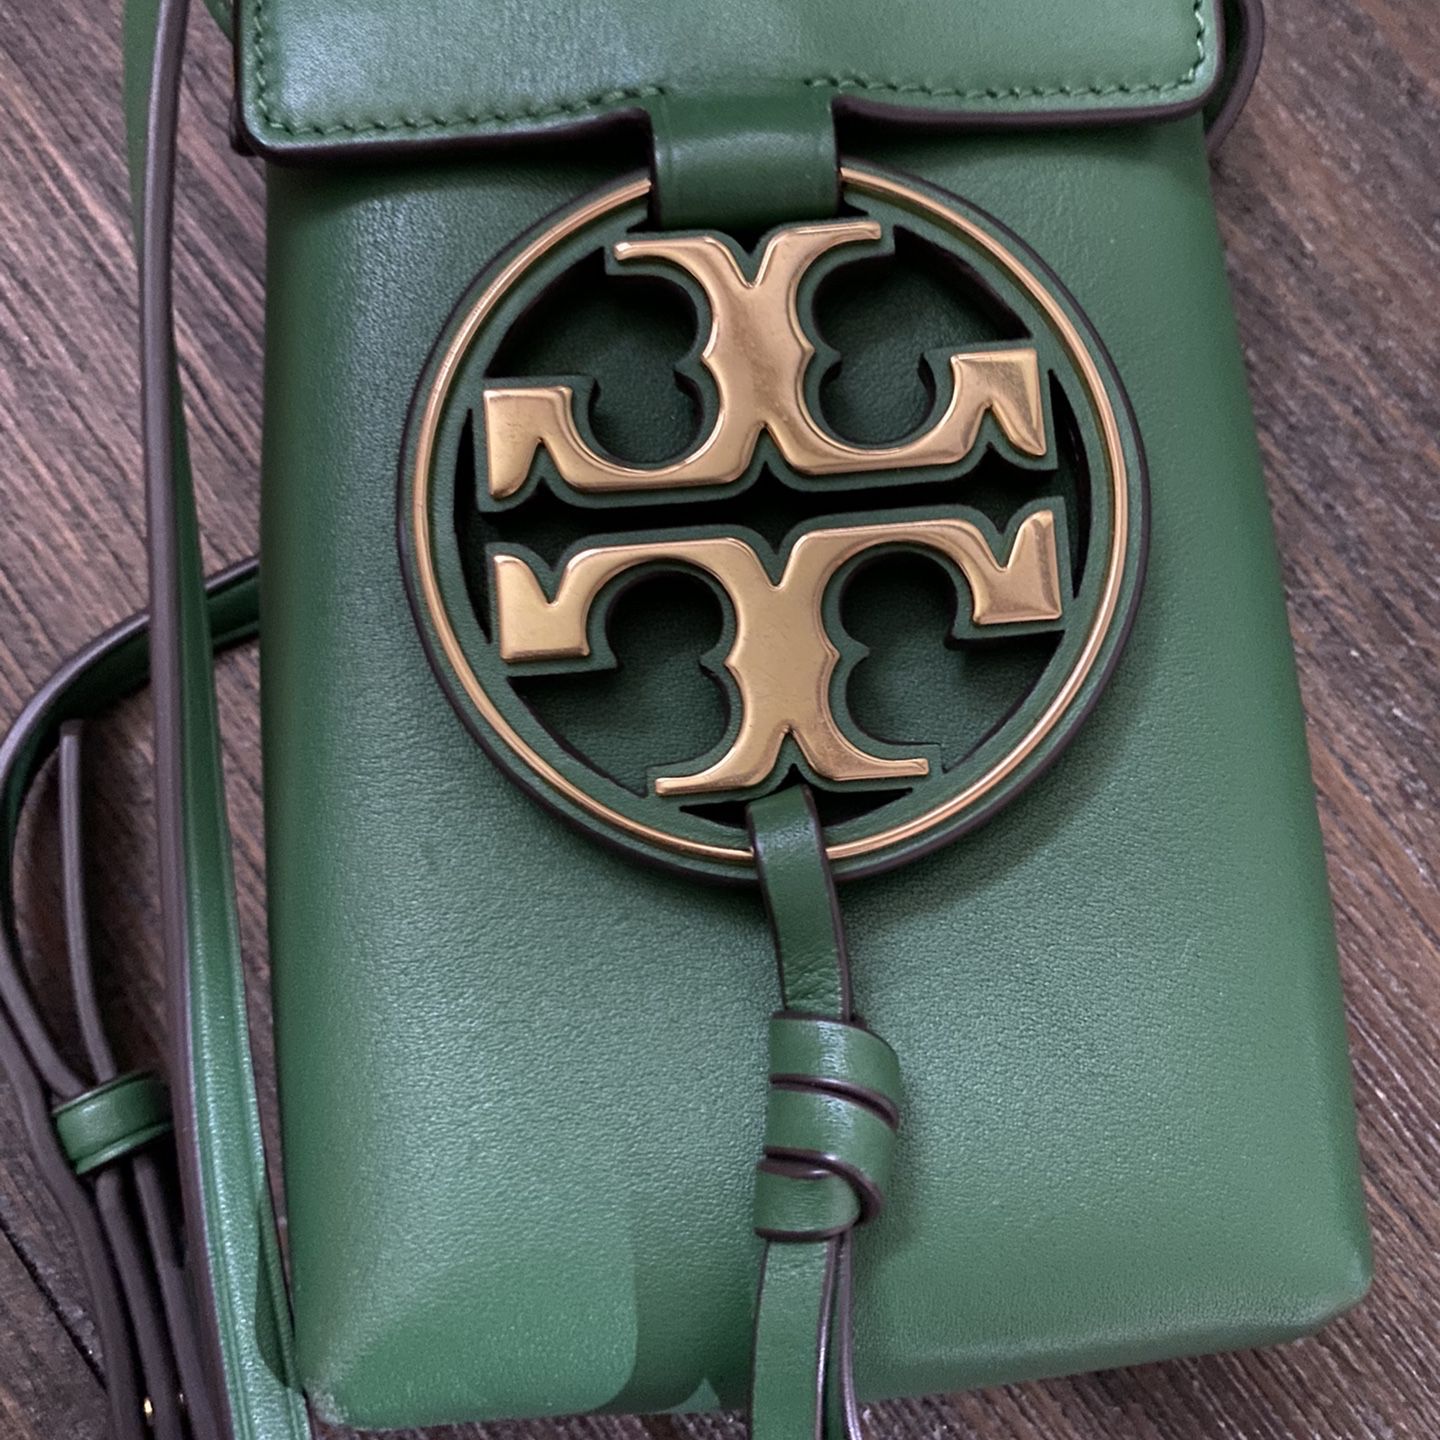 Tory Burch Crossbody Purse for Sale in Columbus, OH - OfferUp